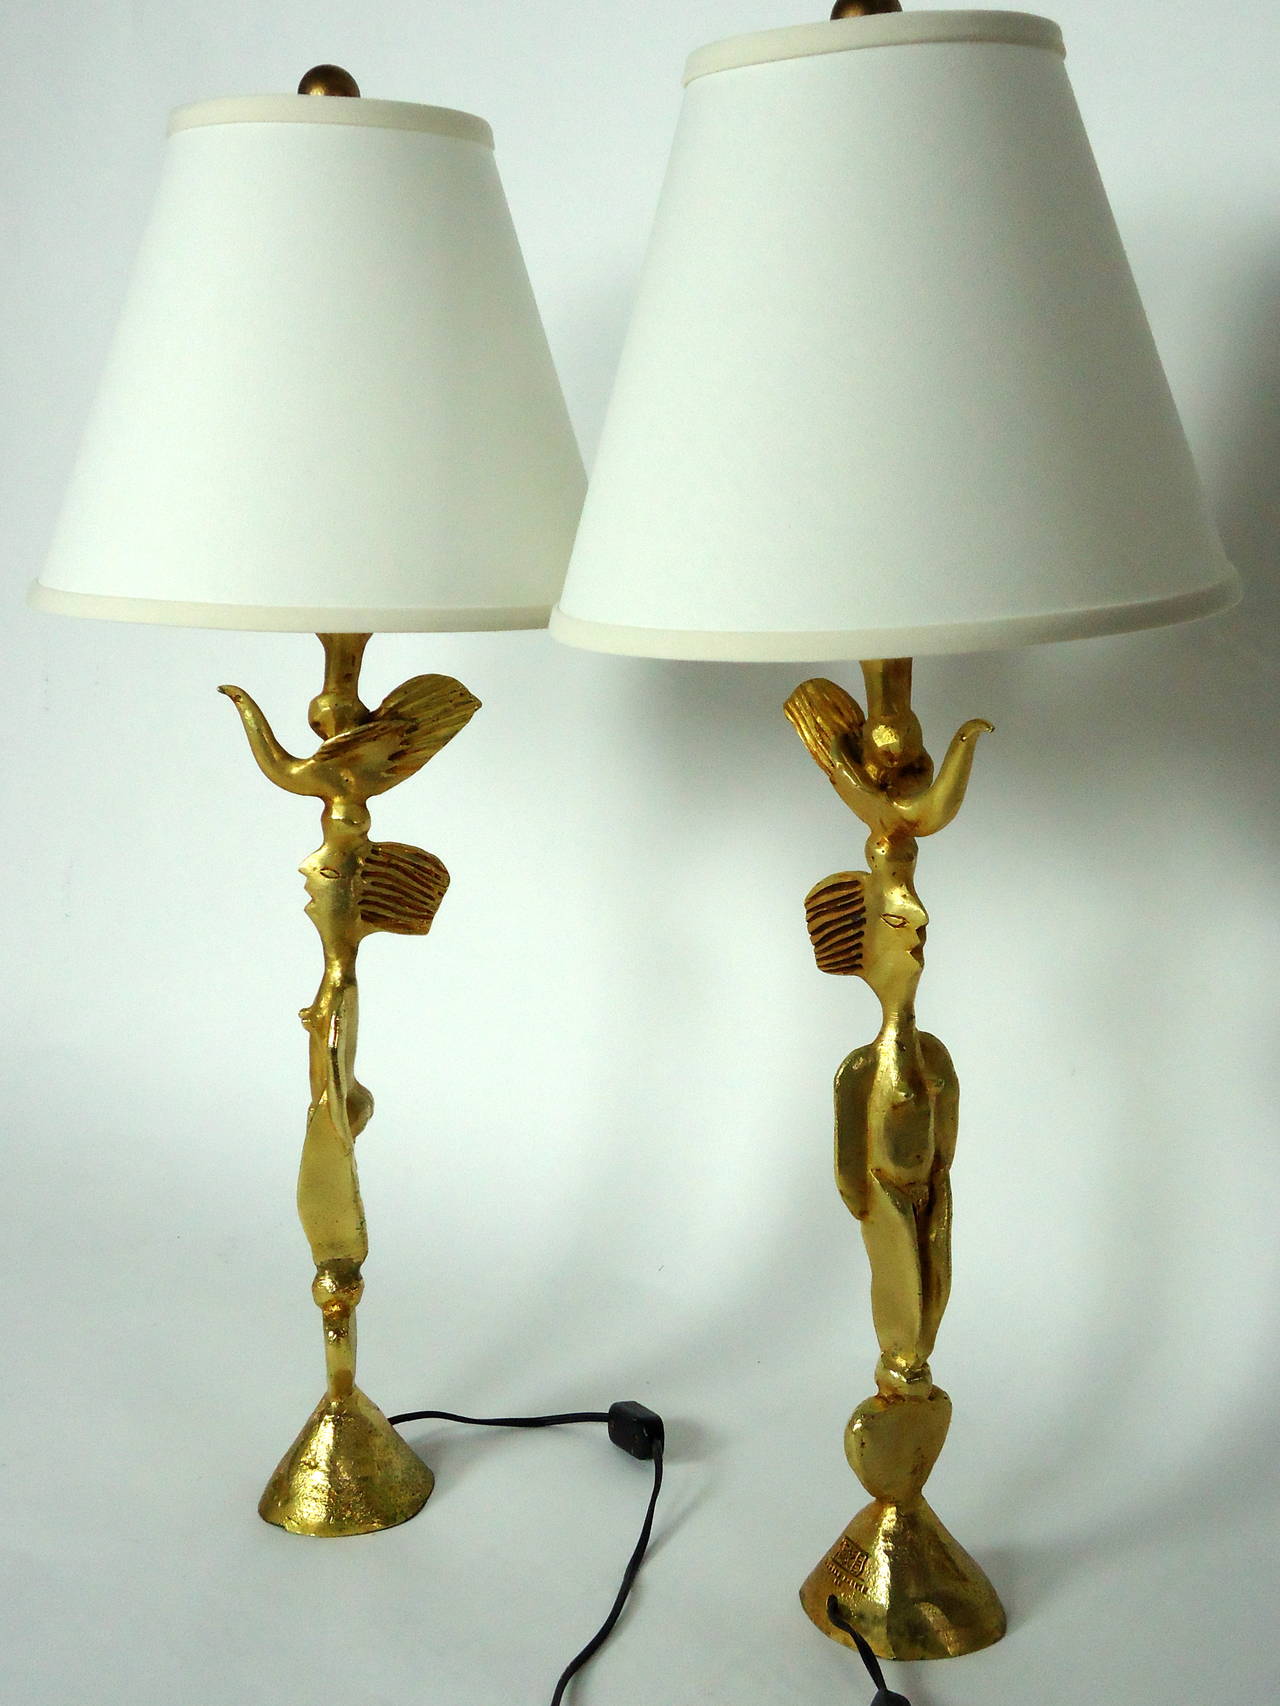 Elegant cast bronze table lamps by Pierre Casenove created at the Fondica Foundry in Paris in 1992. 
Both bear full foundry stamps and have replaced light sockets and shades.
The lamps are in excellent condition.